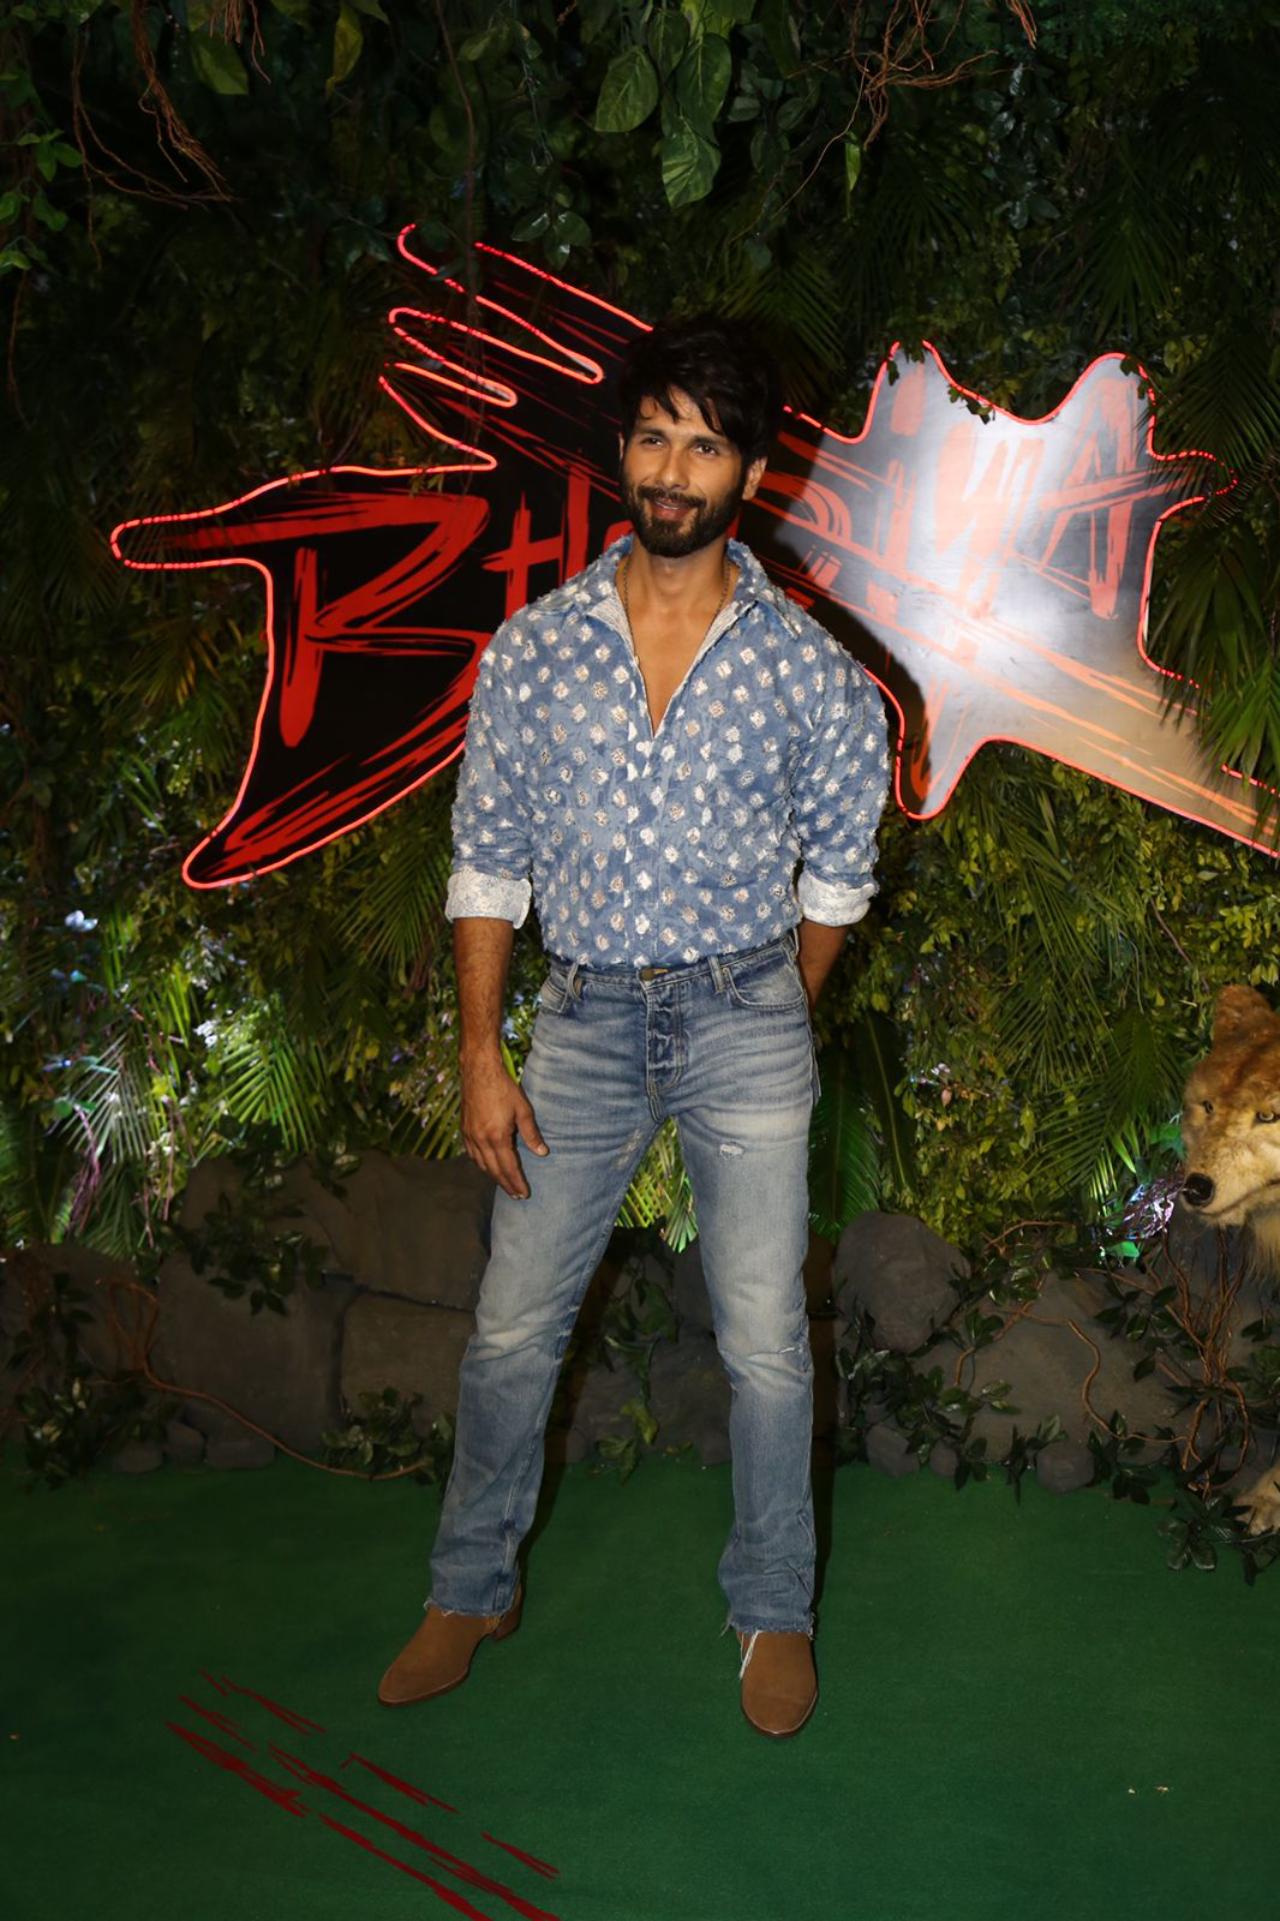 Shahid Kapoor was also seen at the screening. He opted for a simple blue shirt and denims to go with it